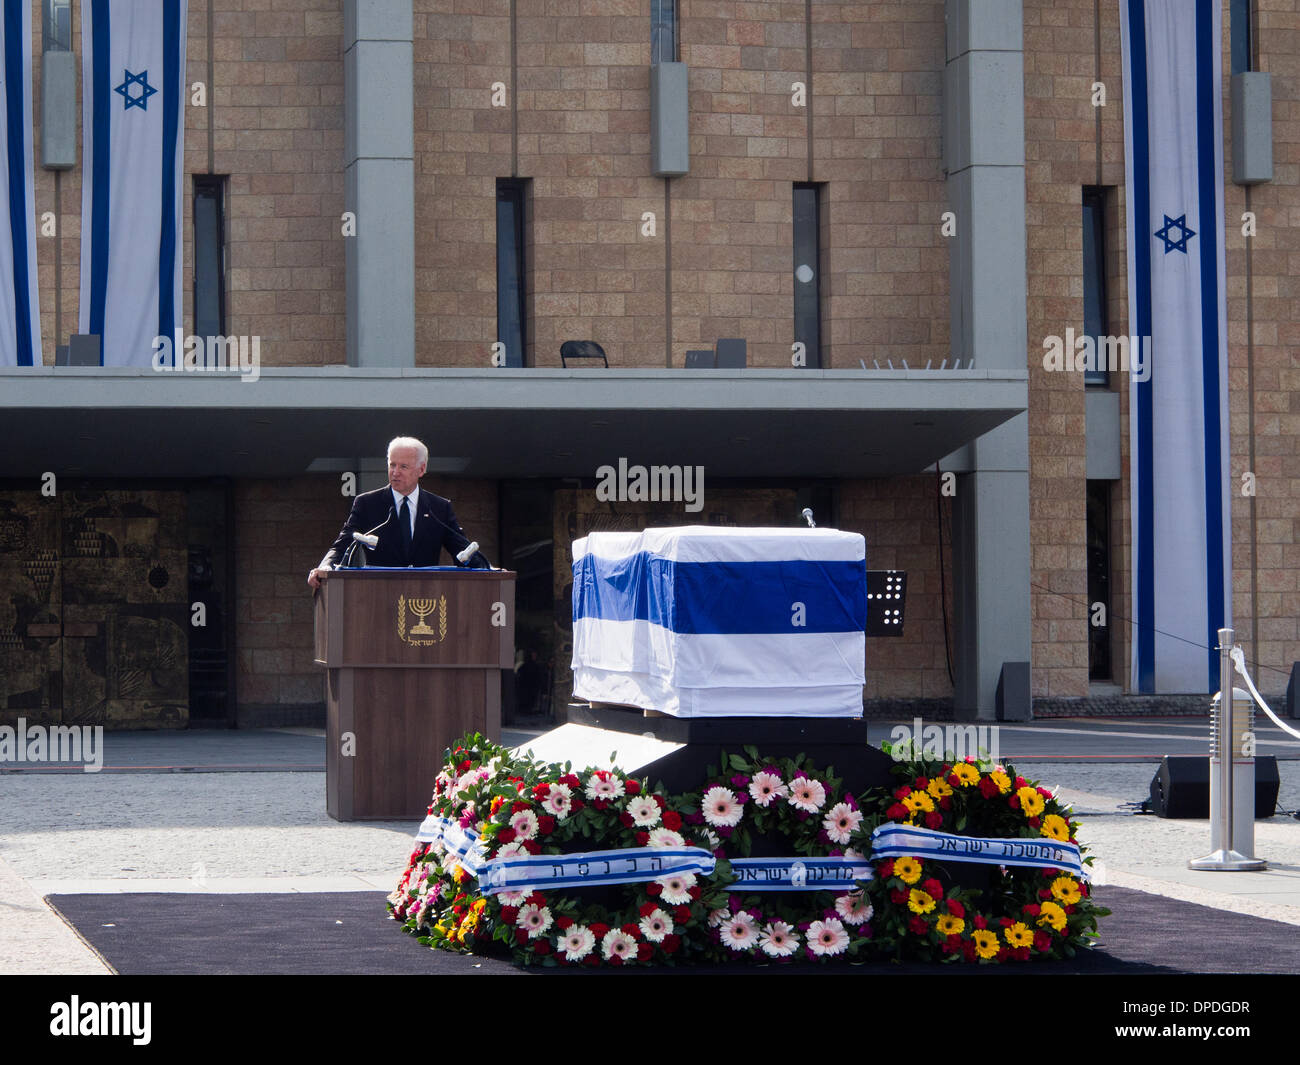 U.S. Vice President, Joe Biden, delivers a eulogy for former Israeli Prime Minister, Ariel Sharon, at the Knesset plaza at a state memorial ceremony. Biden headed one of over twenty international delegations paying last respects to Sharon. Jerusalem, Israel. 13-Jan-2014.  A state memorial ceremony was held at the Knesset for Former PM Ariel Sharon. President Peres, PM Netanyahu, Knesset Speaker Edelstein, US Vice President Biden and former British PM Blair delivered eulogies. Sharon passed away Saturday at age 85. Stock Photo